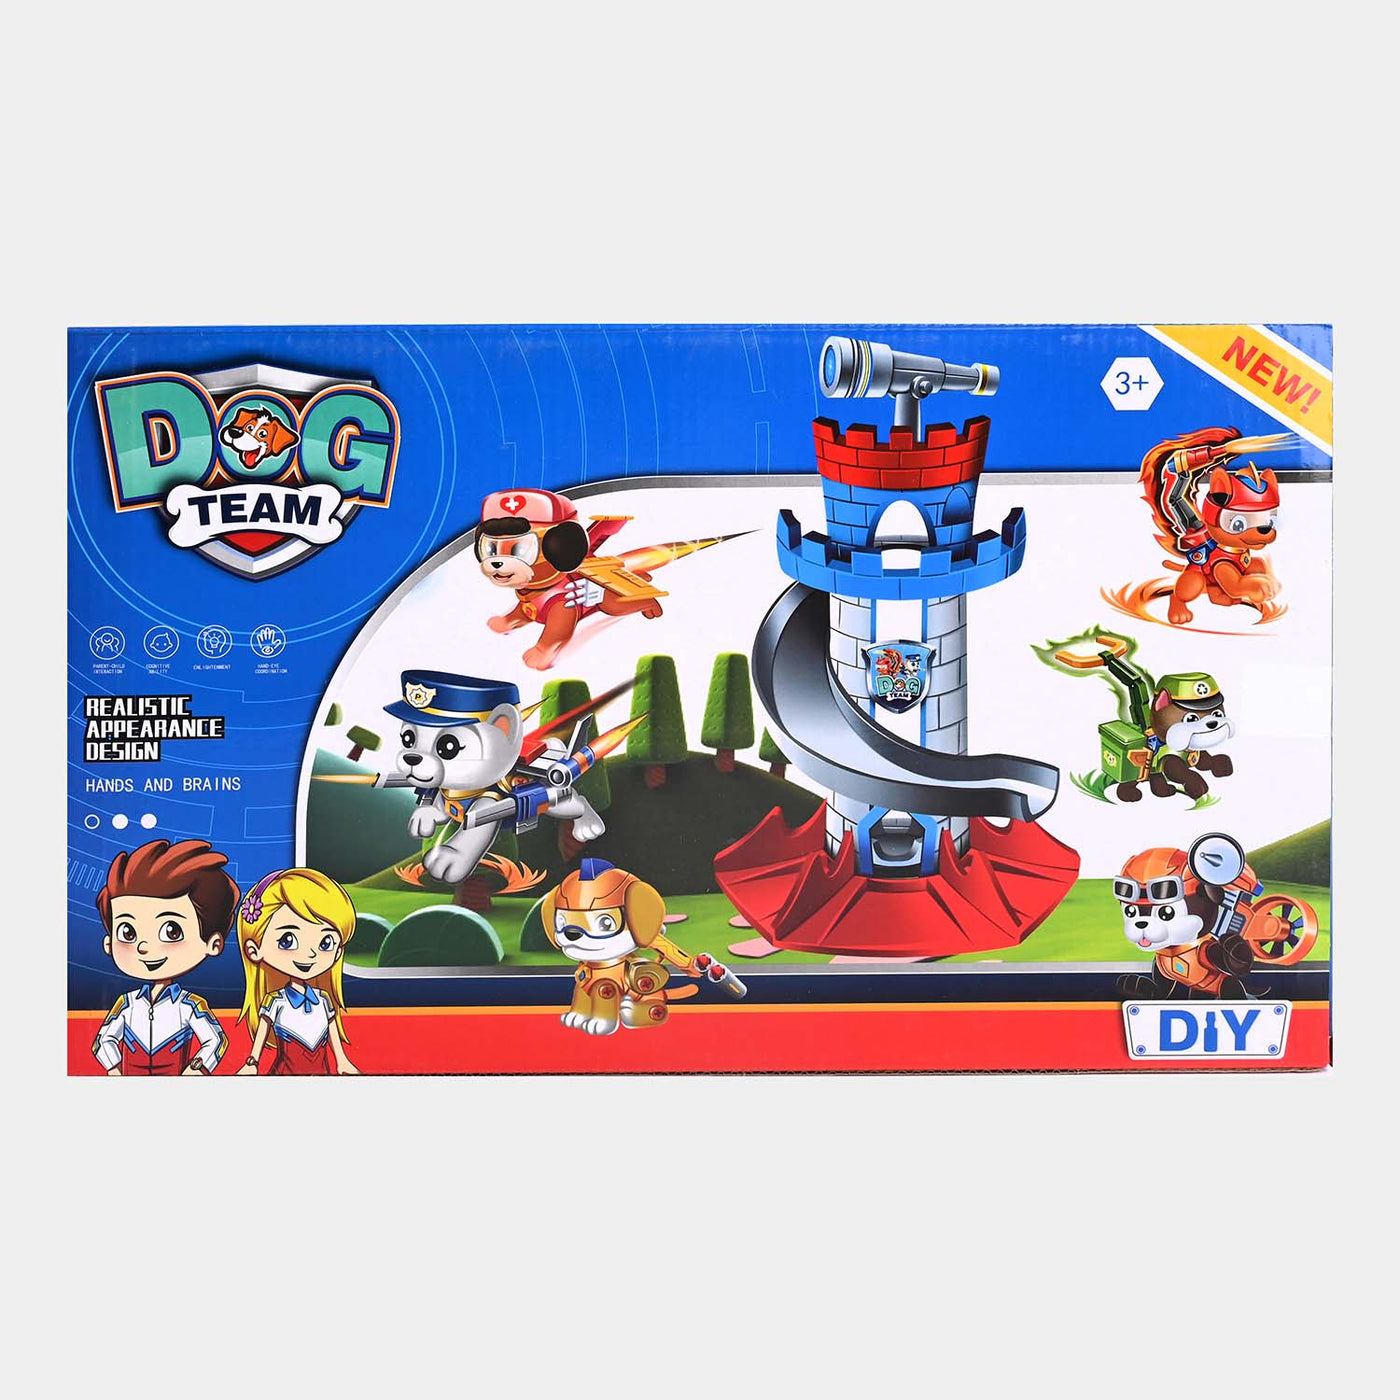 DIY Assembly Character Toy Play Set For Kids